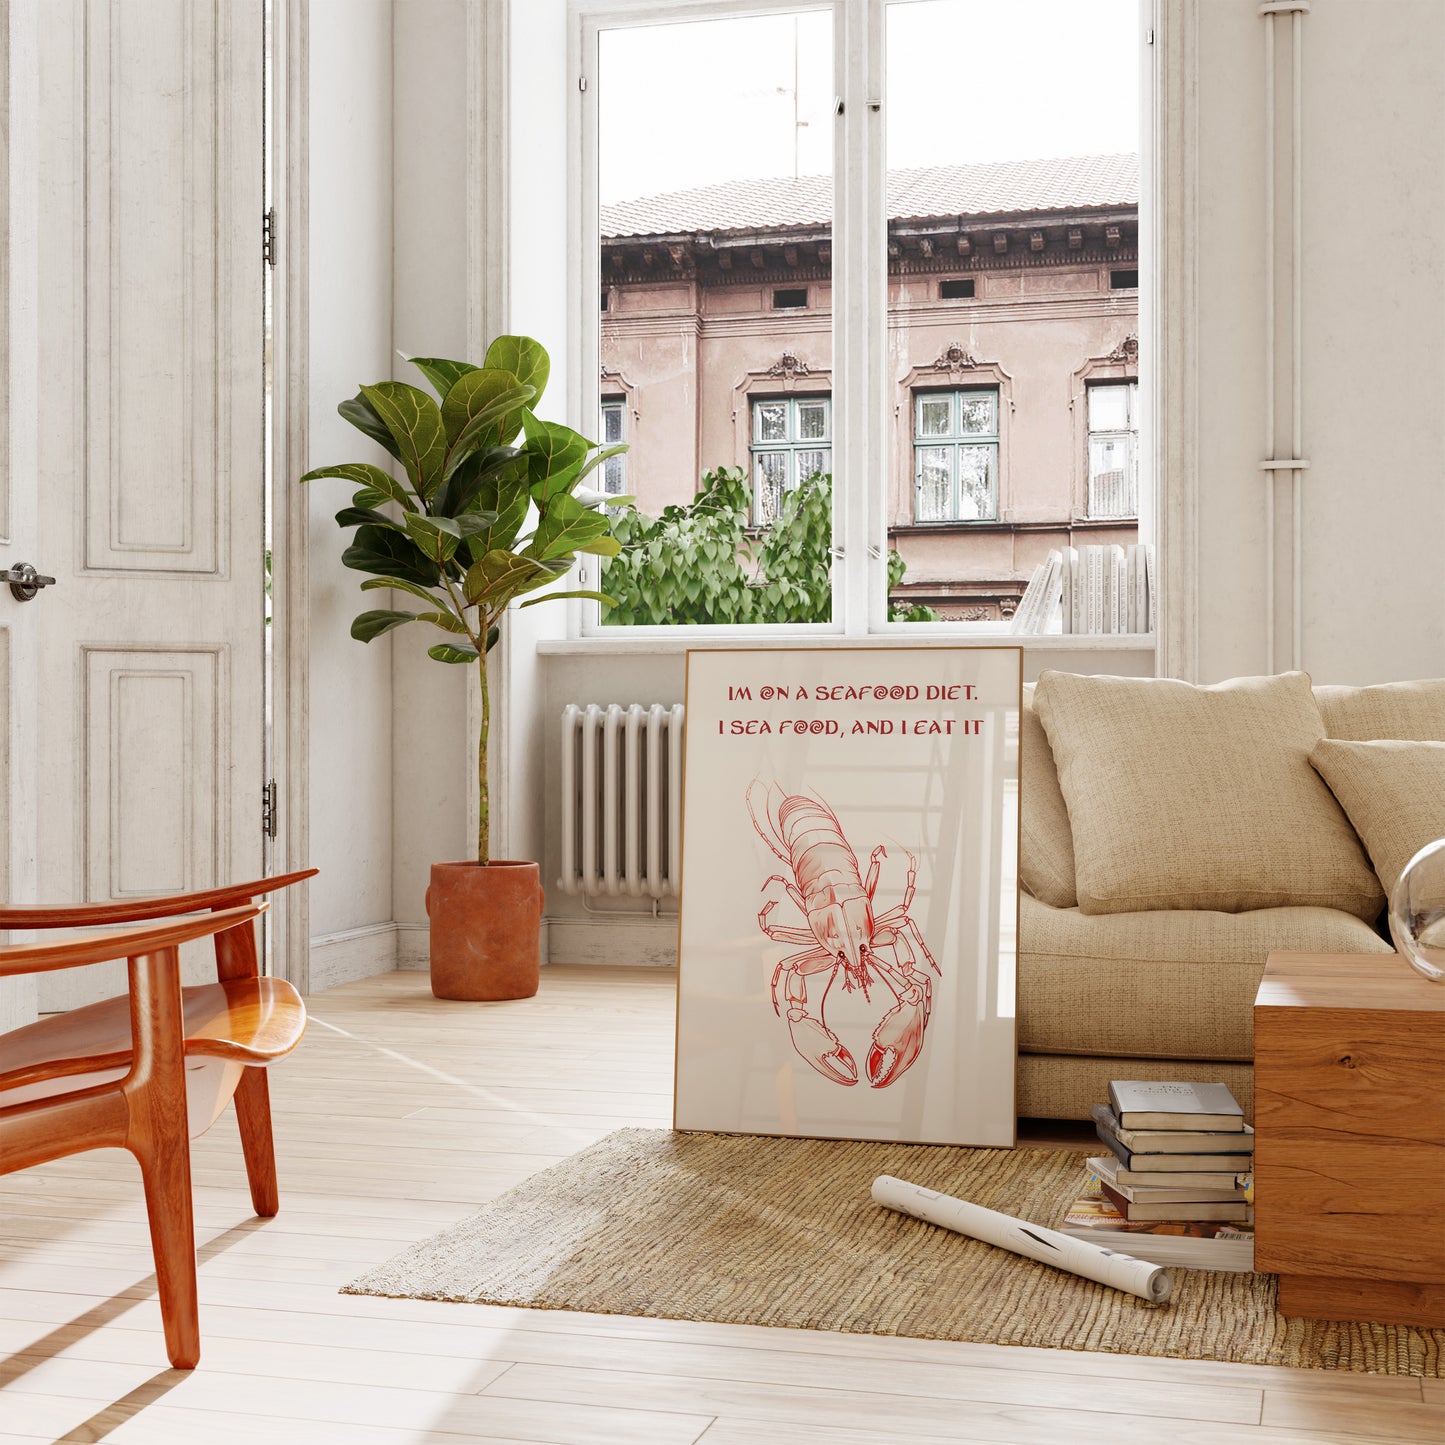 Cozy living room with a plant, a humorous seafood diet poster, and stylish furniture.